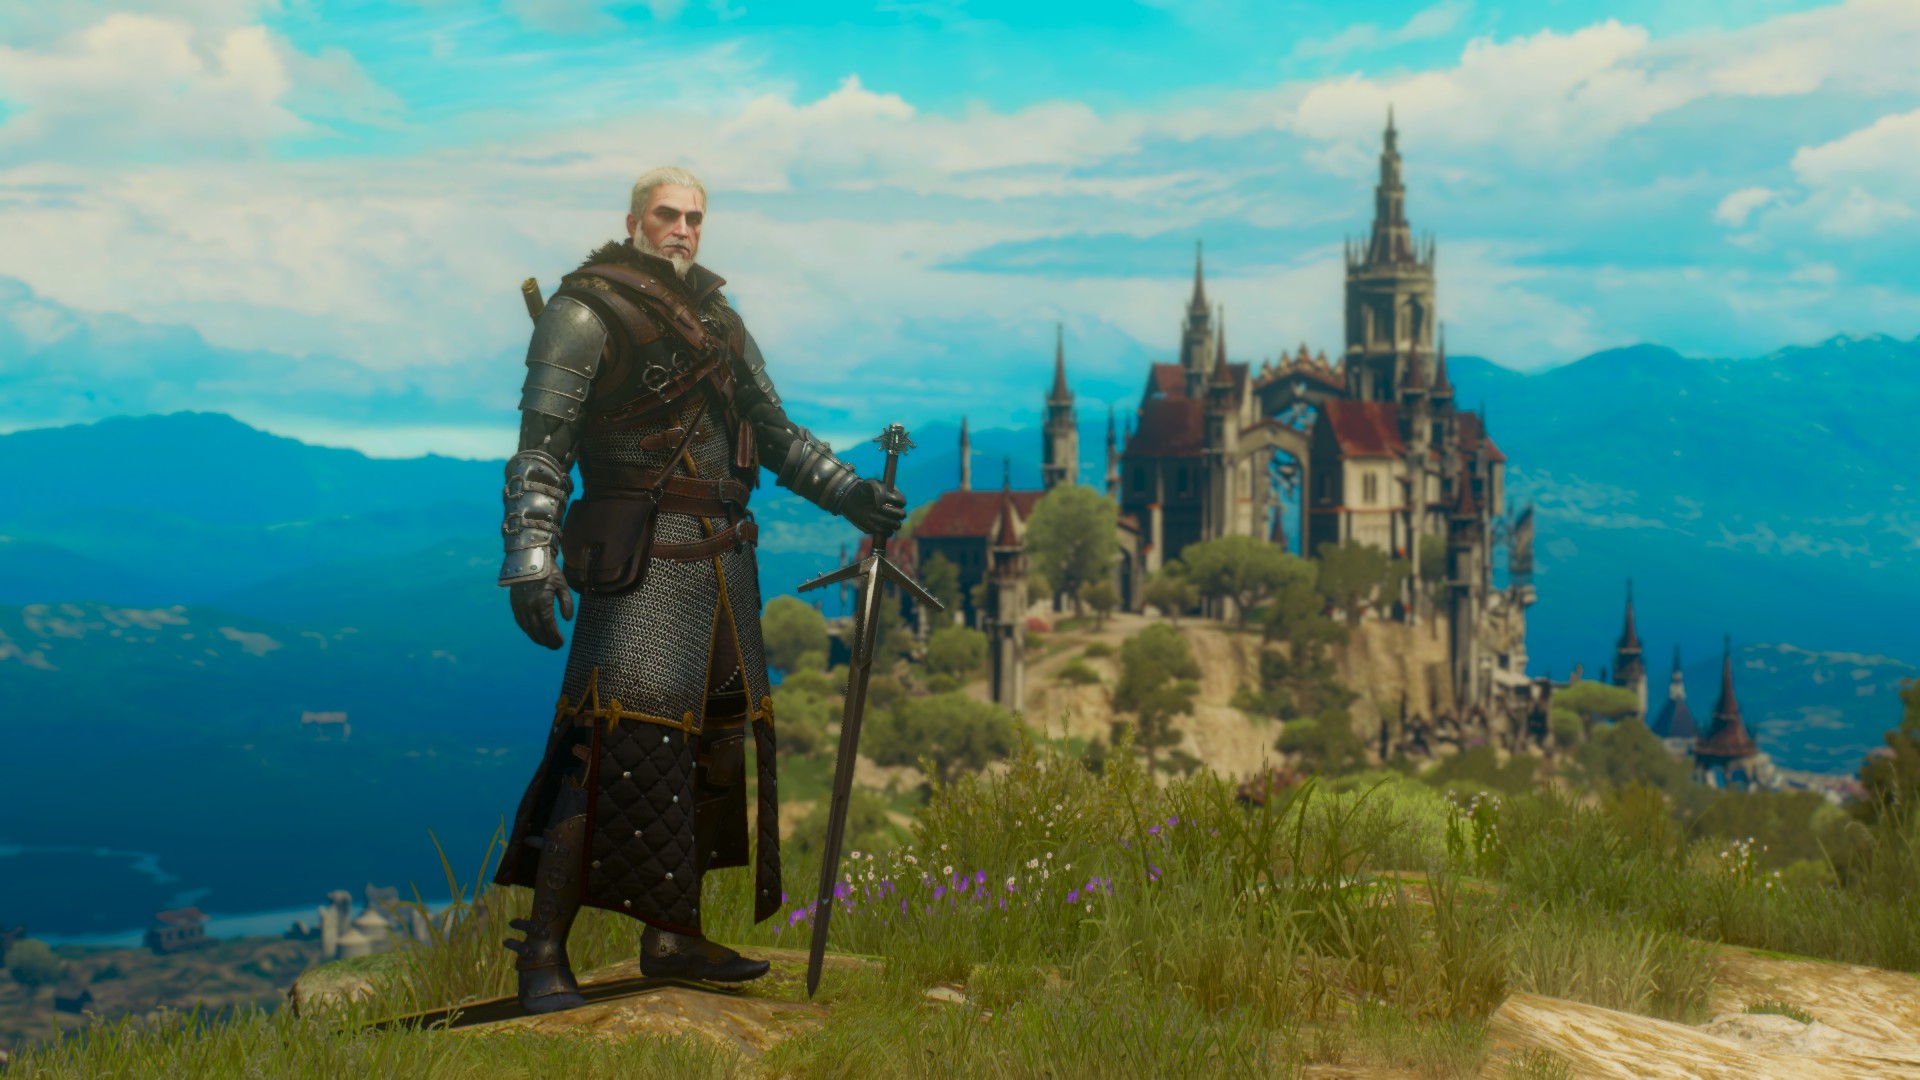 General 1920x1080 The Witcher 3: Wild Hunt The Witcher 3: Wild Hunt - Blood and Wine Toussaint Geralt of Rivia The Witcher video games video game characters Book characters CD Projekt RED